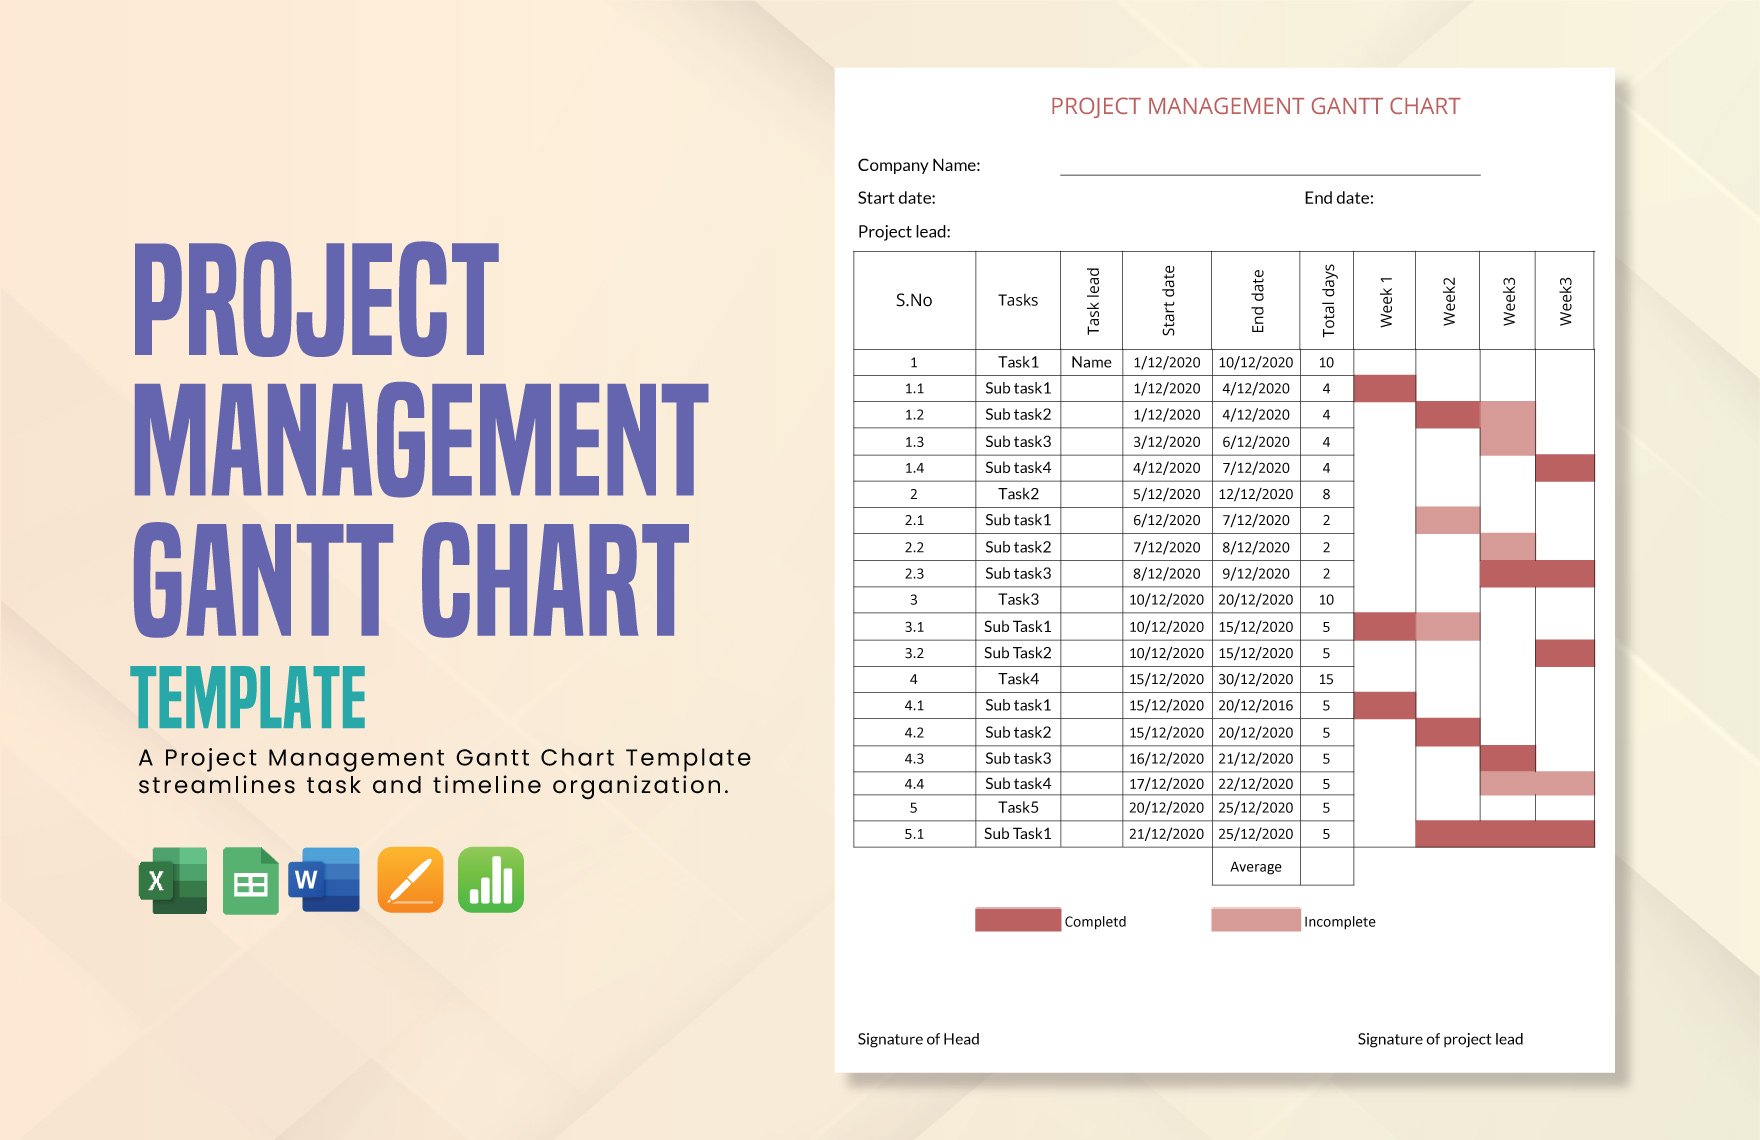 Project Management Gantt Chart Template in Apple Pages Word Apple